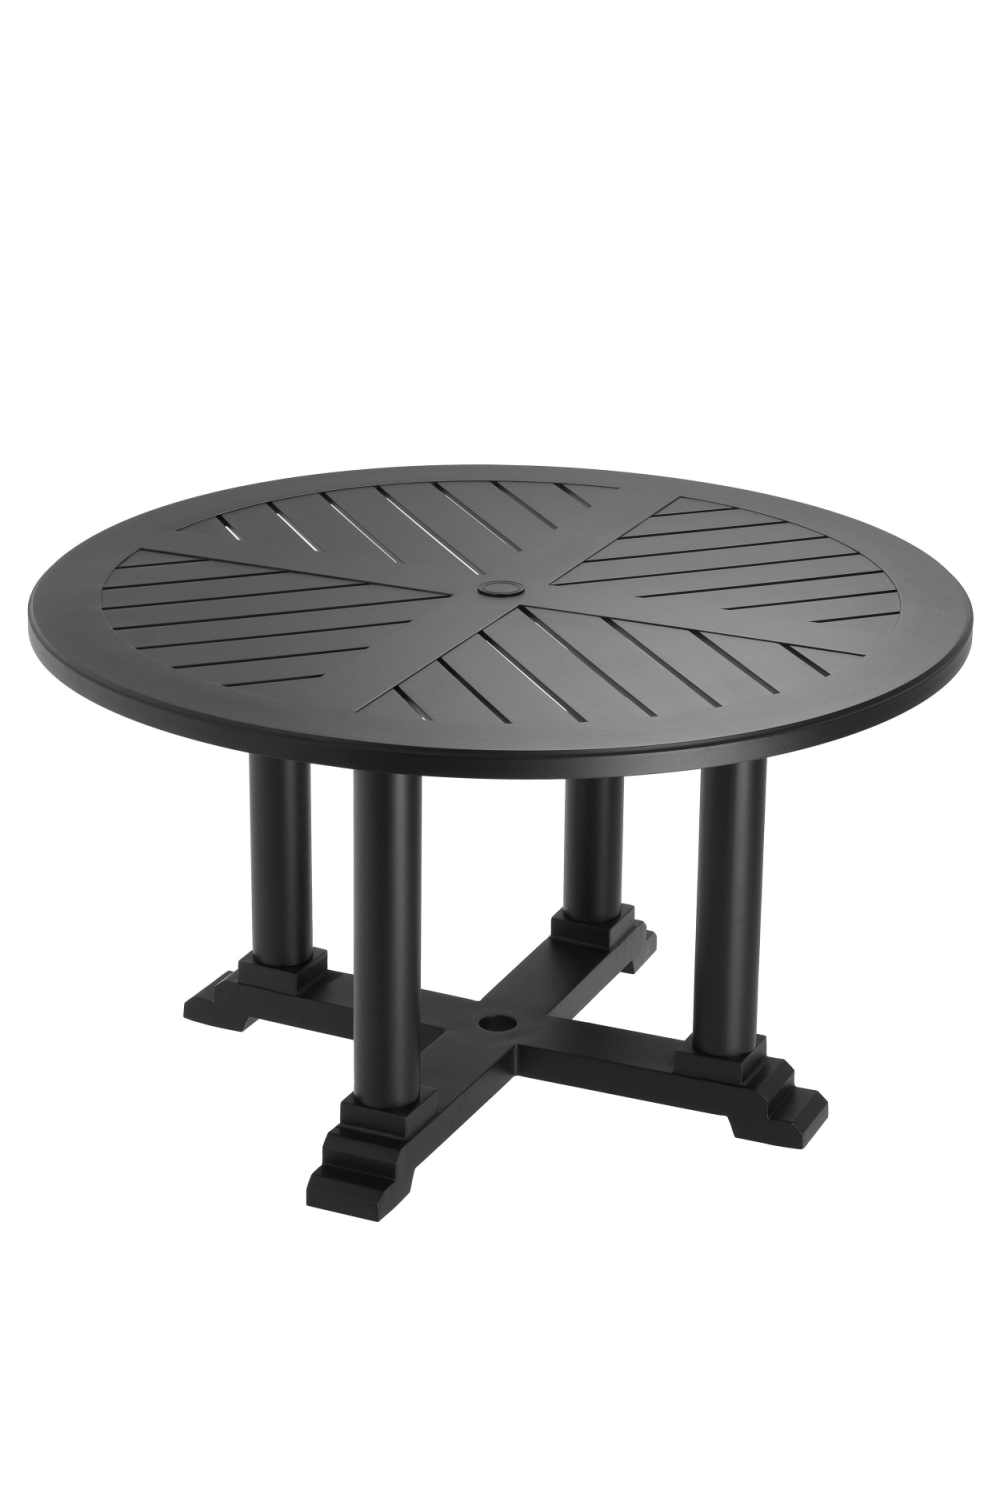 Black Round Outdoor Dining Table | Eichholtz Bell Rive S | Oroatrade.com